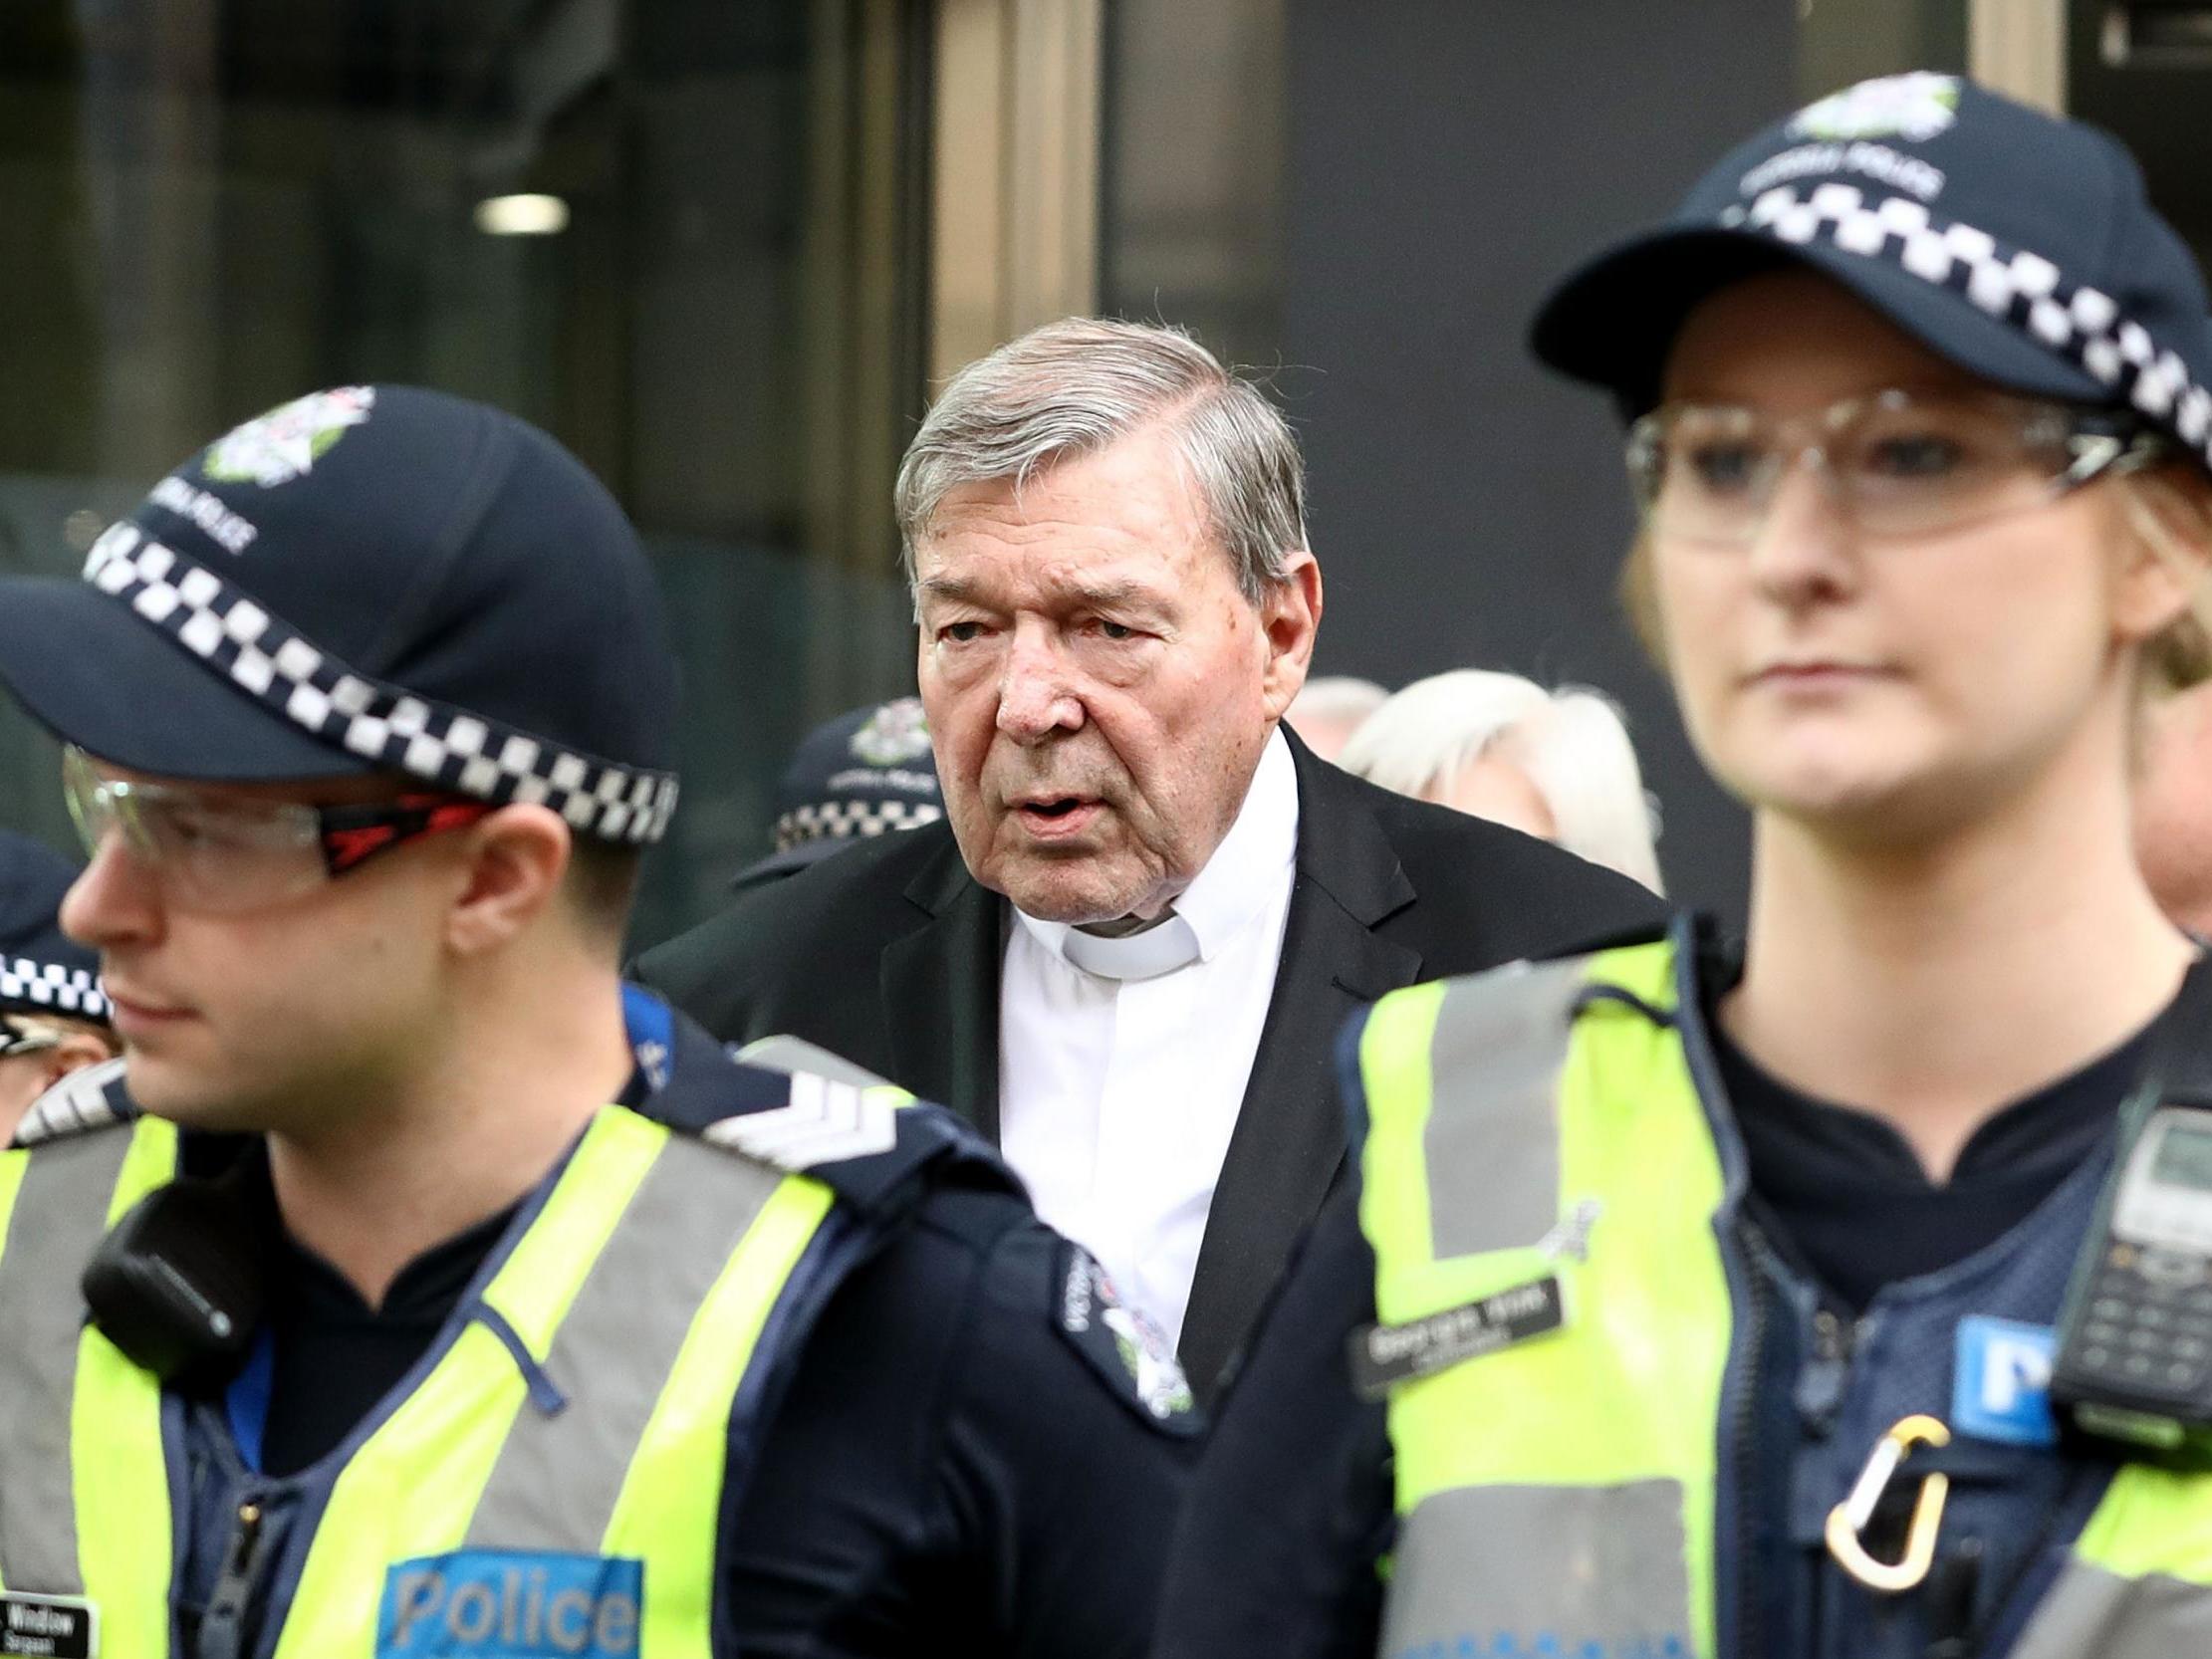 Related image: Cardinal George Pell leaves Melbourne Magistrates' Court on May 2 2018